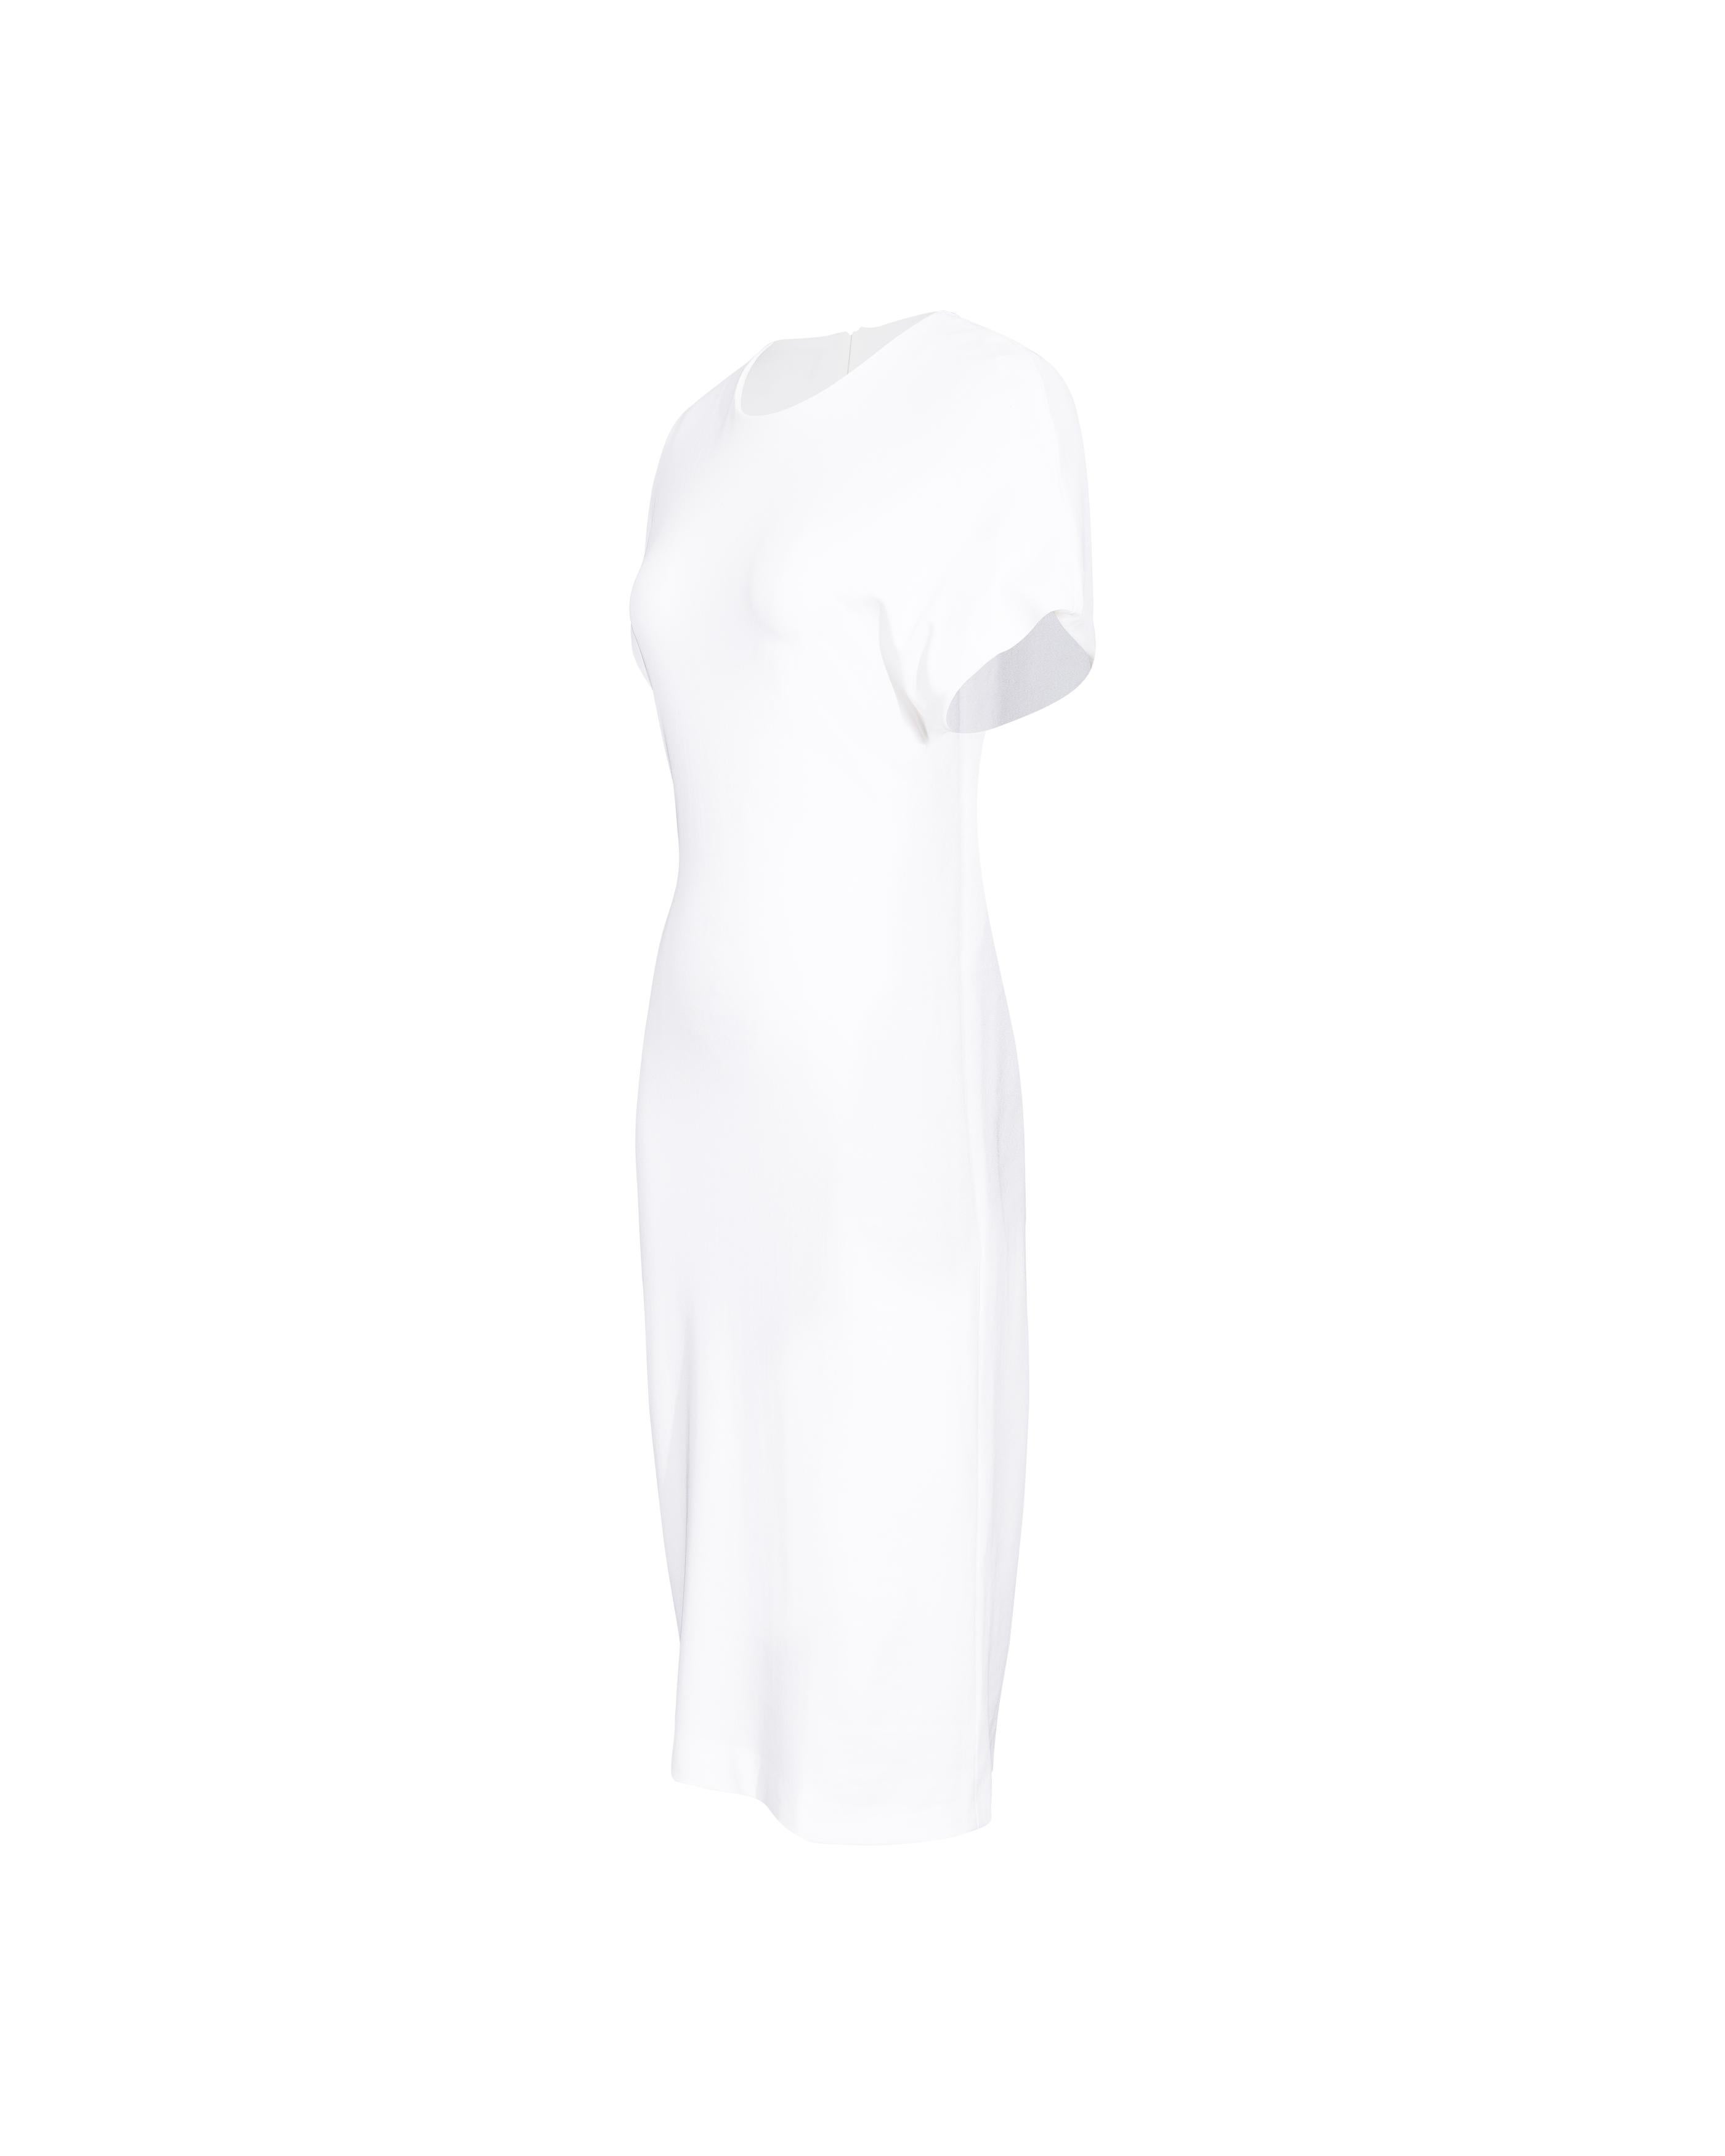 A/W 1996 Gucci by Tom Ford white cap sleeve knee-length jersey dress. Concealed back zip closure, with stamped 'Gucci' white zipper. Moderate stretch throughout. Gown versions featured on runway. A rare piece that is highly wearable and is